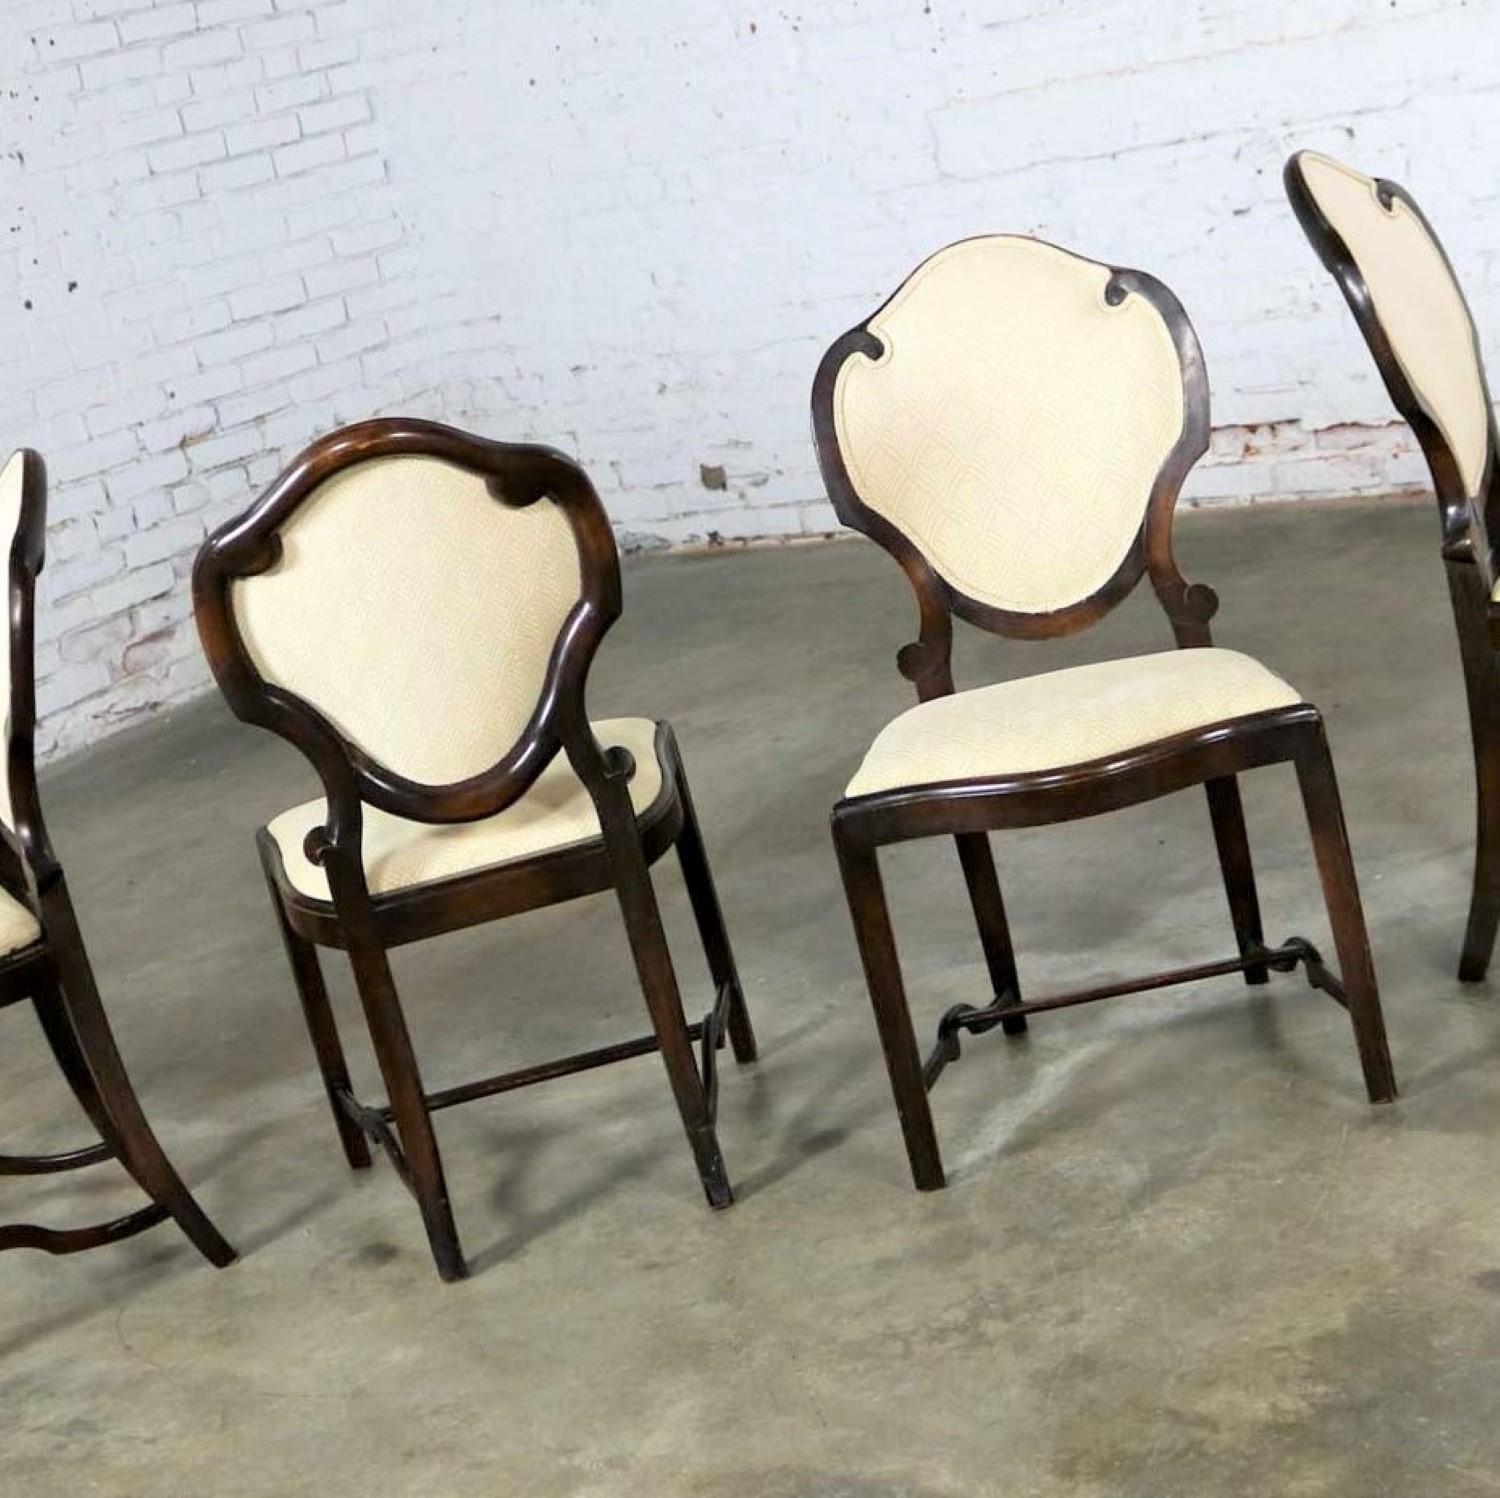 Incredible Art Nouveau or Art Deco set of four dining chairs with shield shaped backs and lots of detail. They are in wonderful original antique condition. They are very solid. The wood frames have lots of beautiful age patina including nicks and